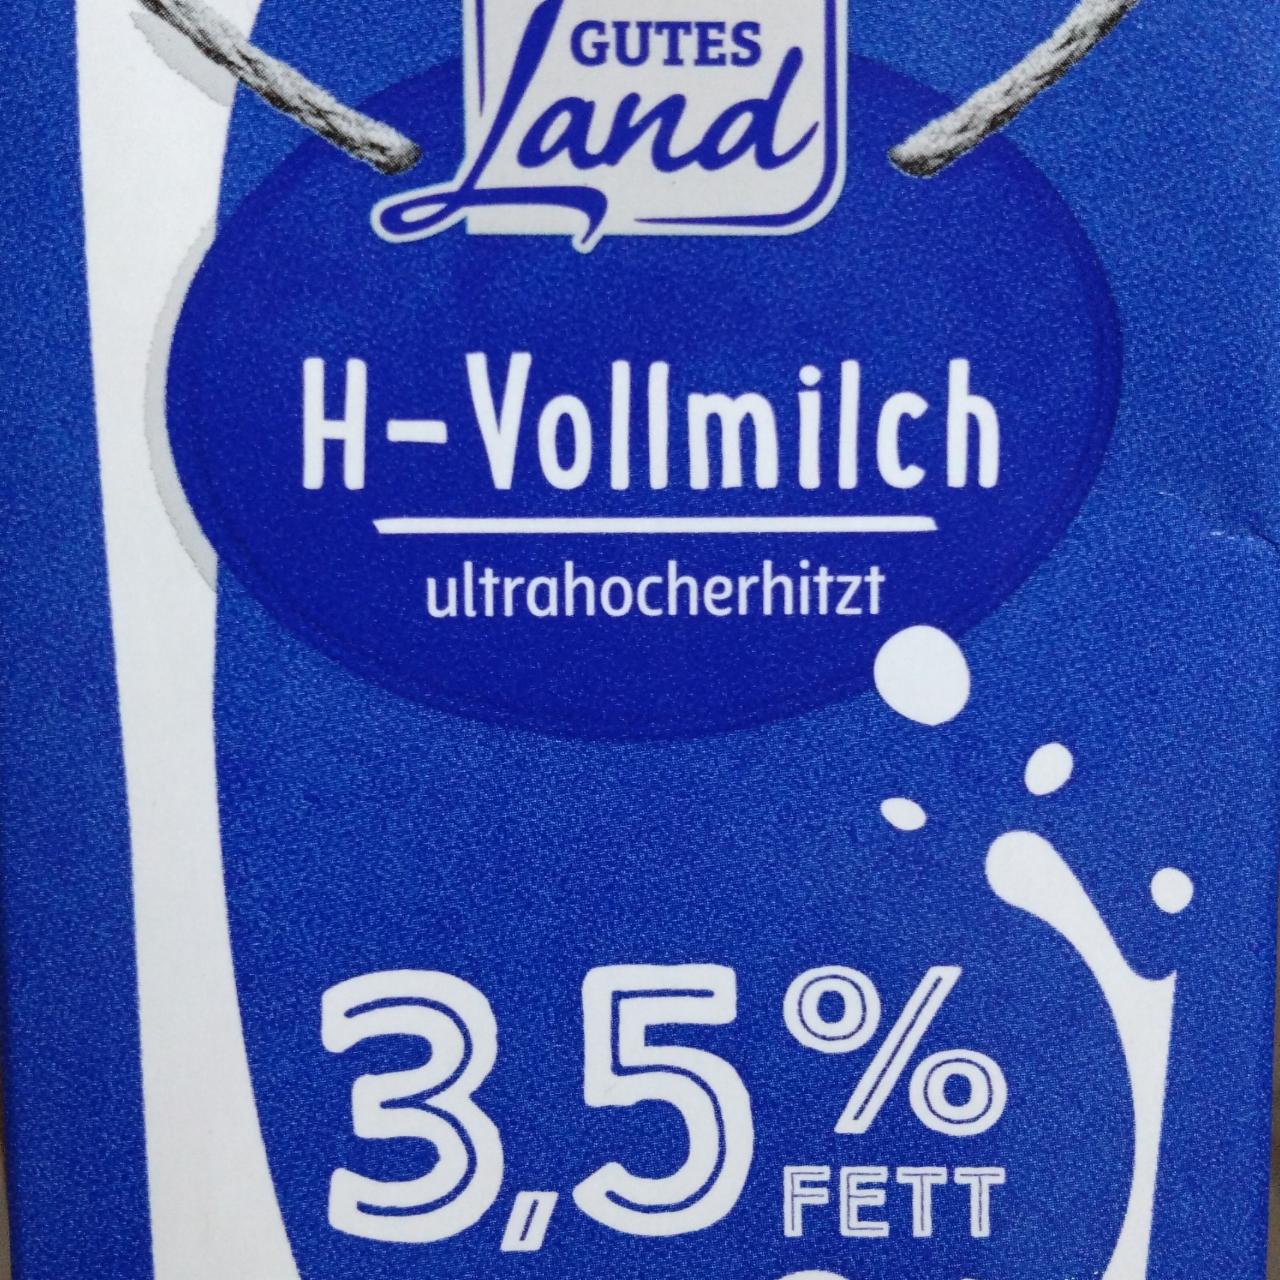 Фото - H-Vollmilch 3.5% Gutes Land